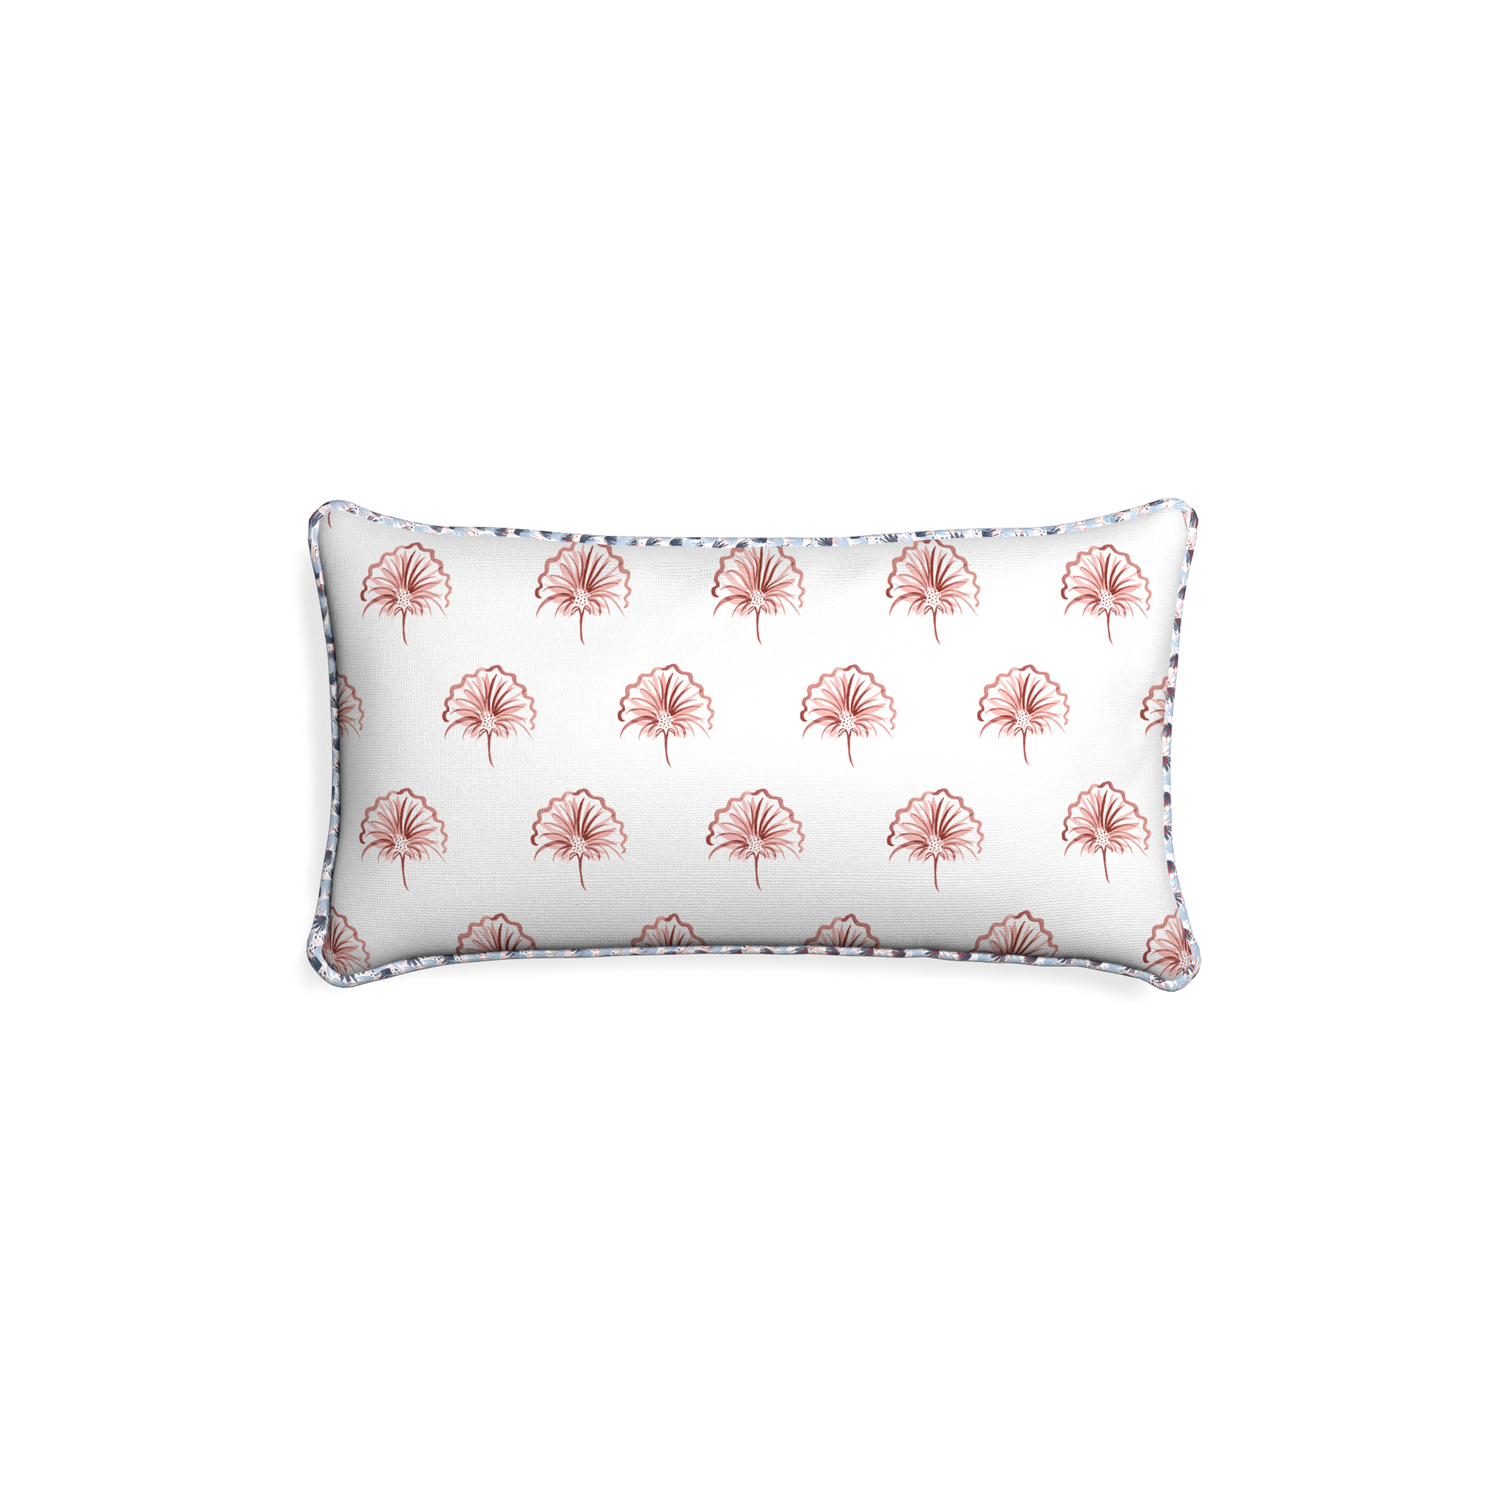 Petite-lumbar penelope rose custom floral pinkpillow with e piping on white background